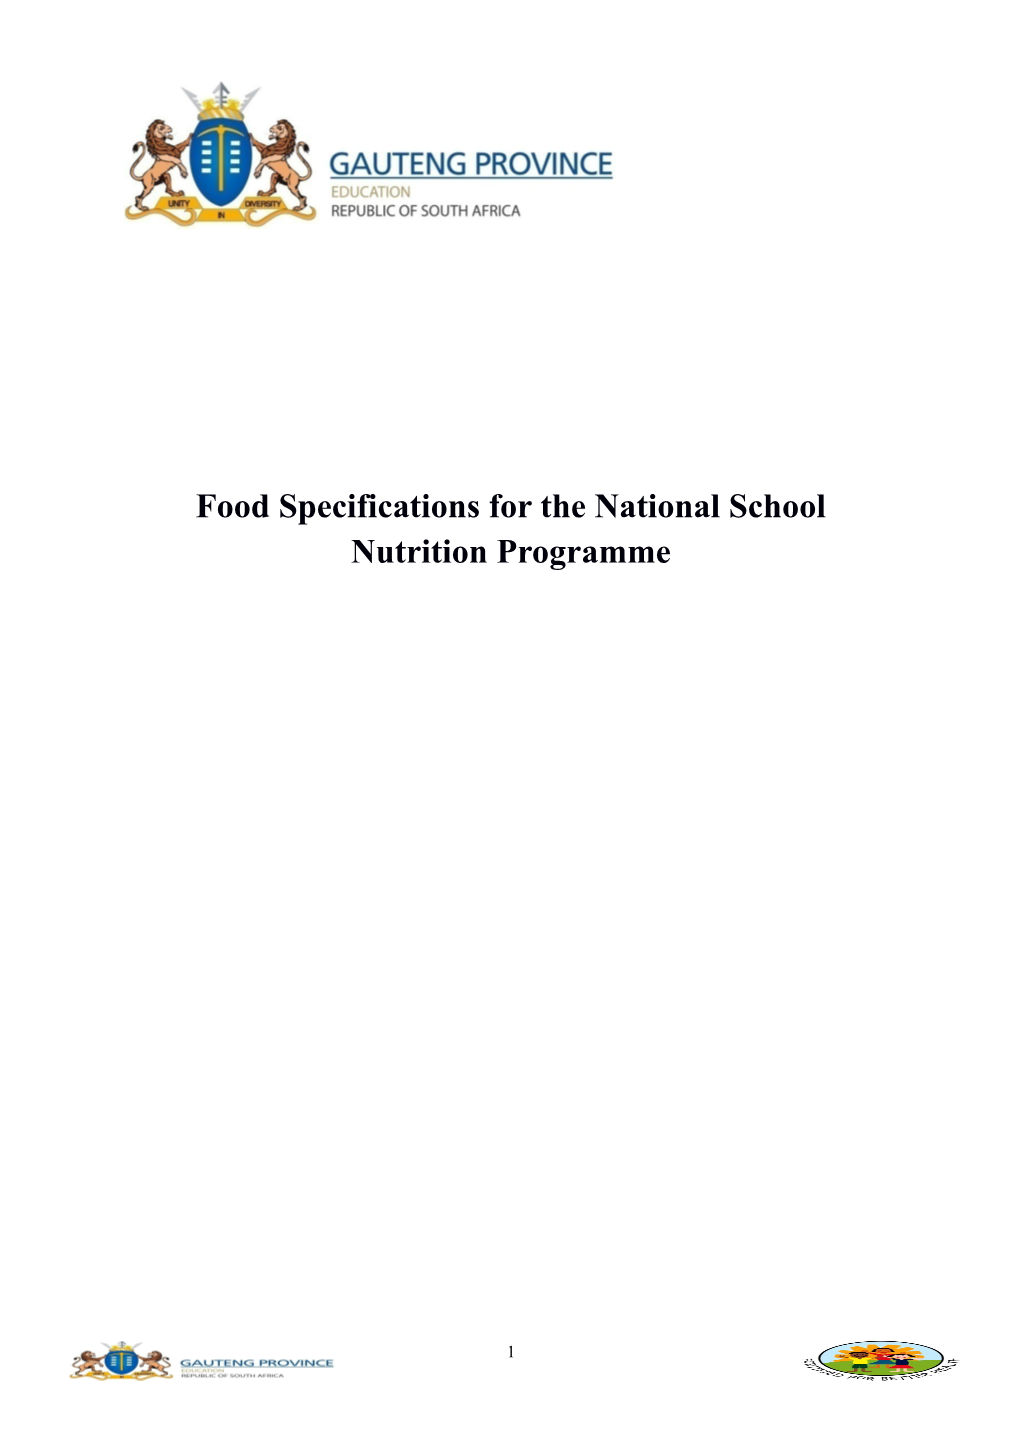 Food Specifications for the National School Nutrition Programme